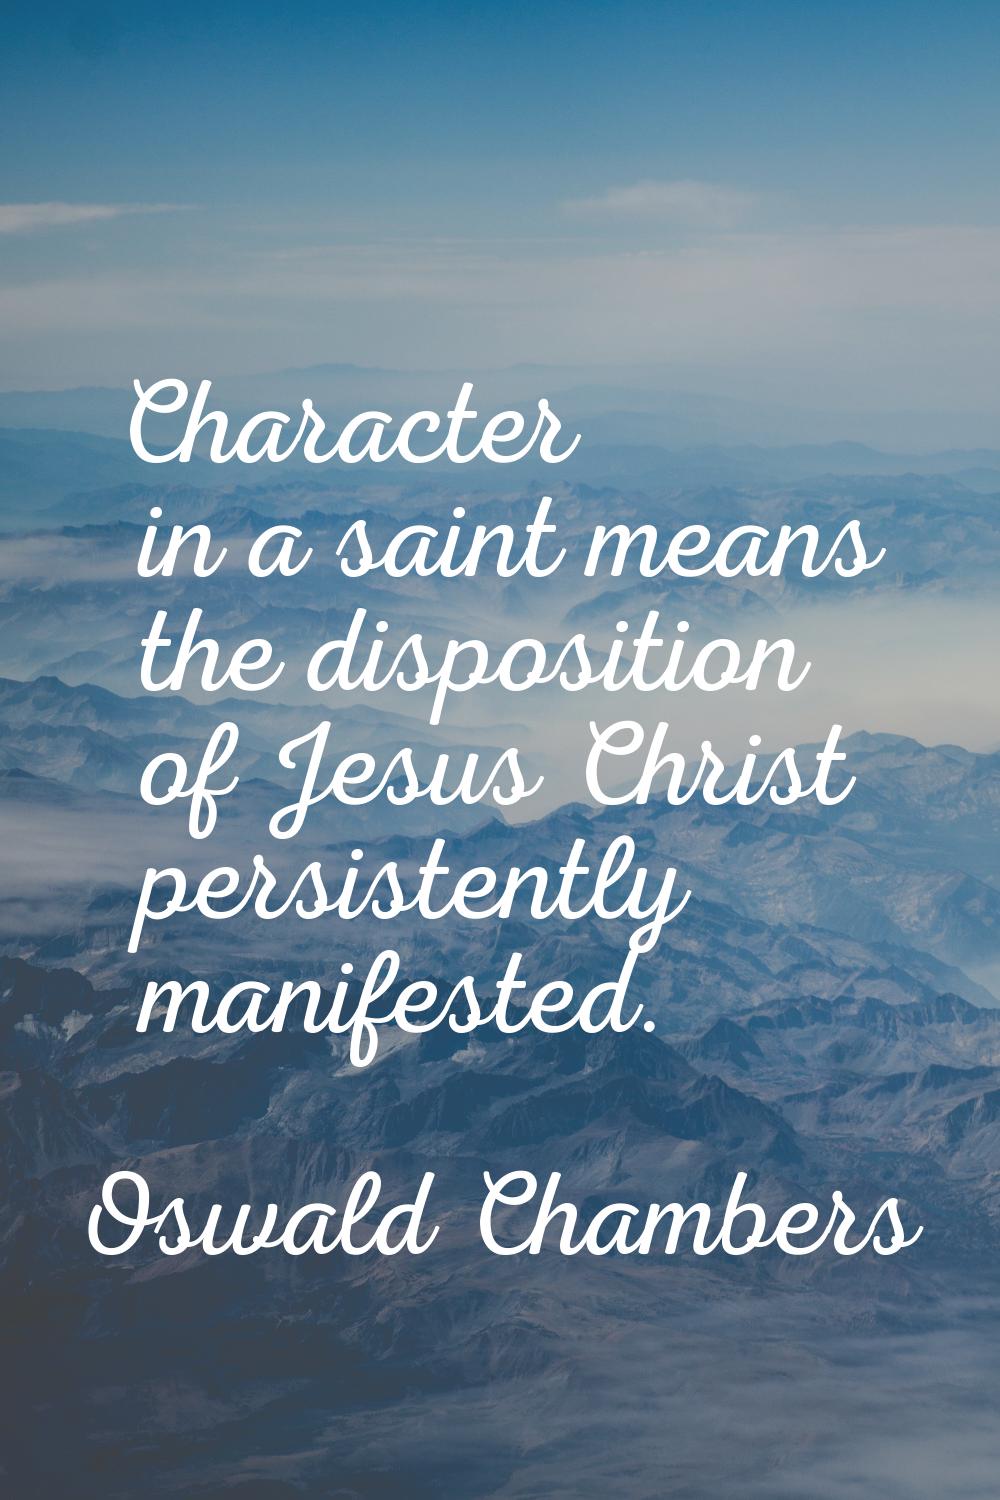 Character in a saint means the disposition of Jesus Christ persistently manifested.